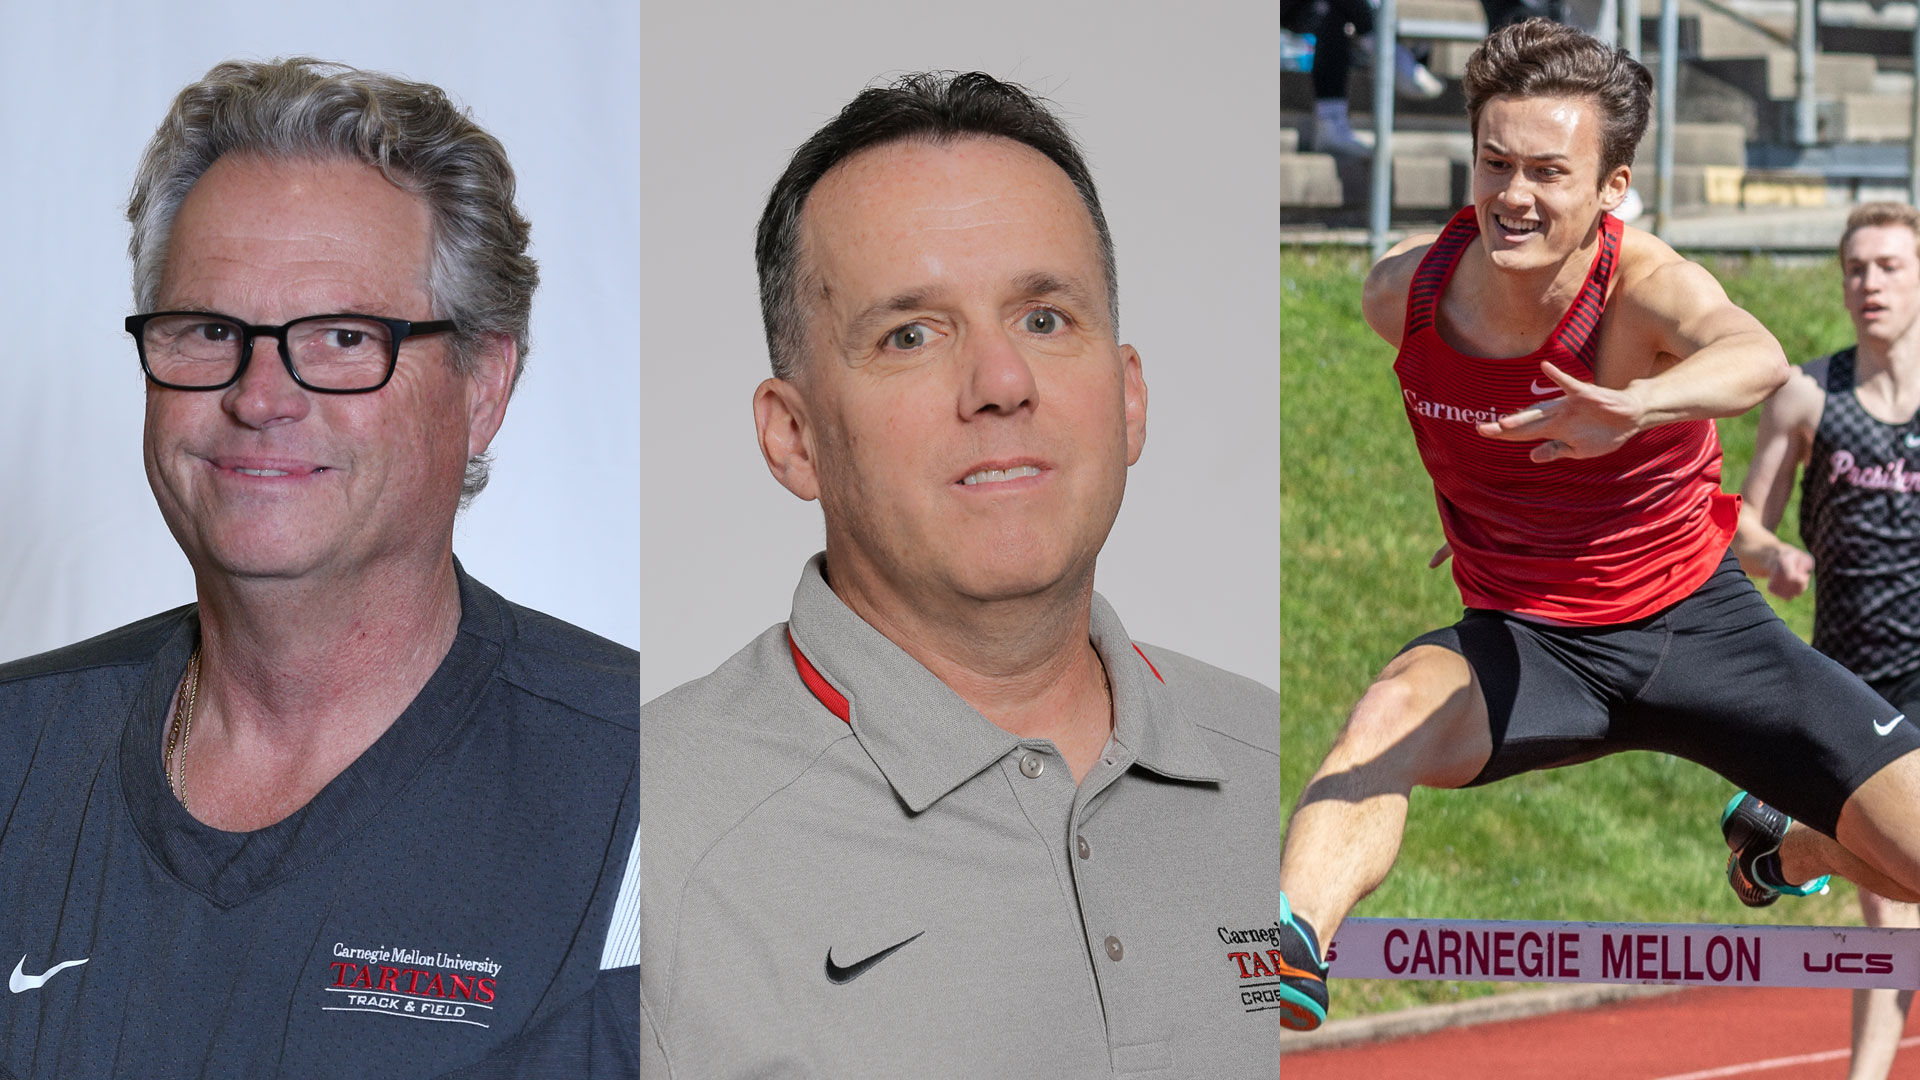 McGovern, Aldrich and Connelly Receive Mid-Atlantic Regional Awards